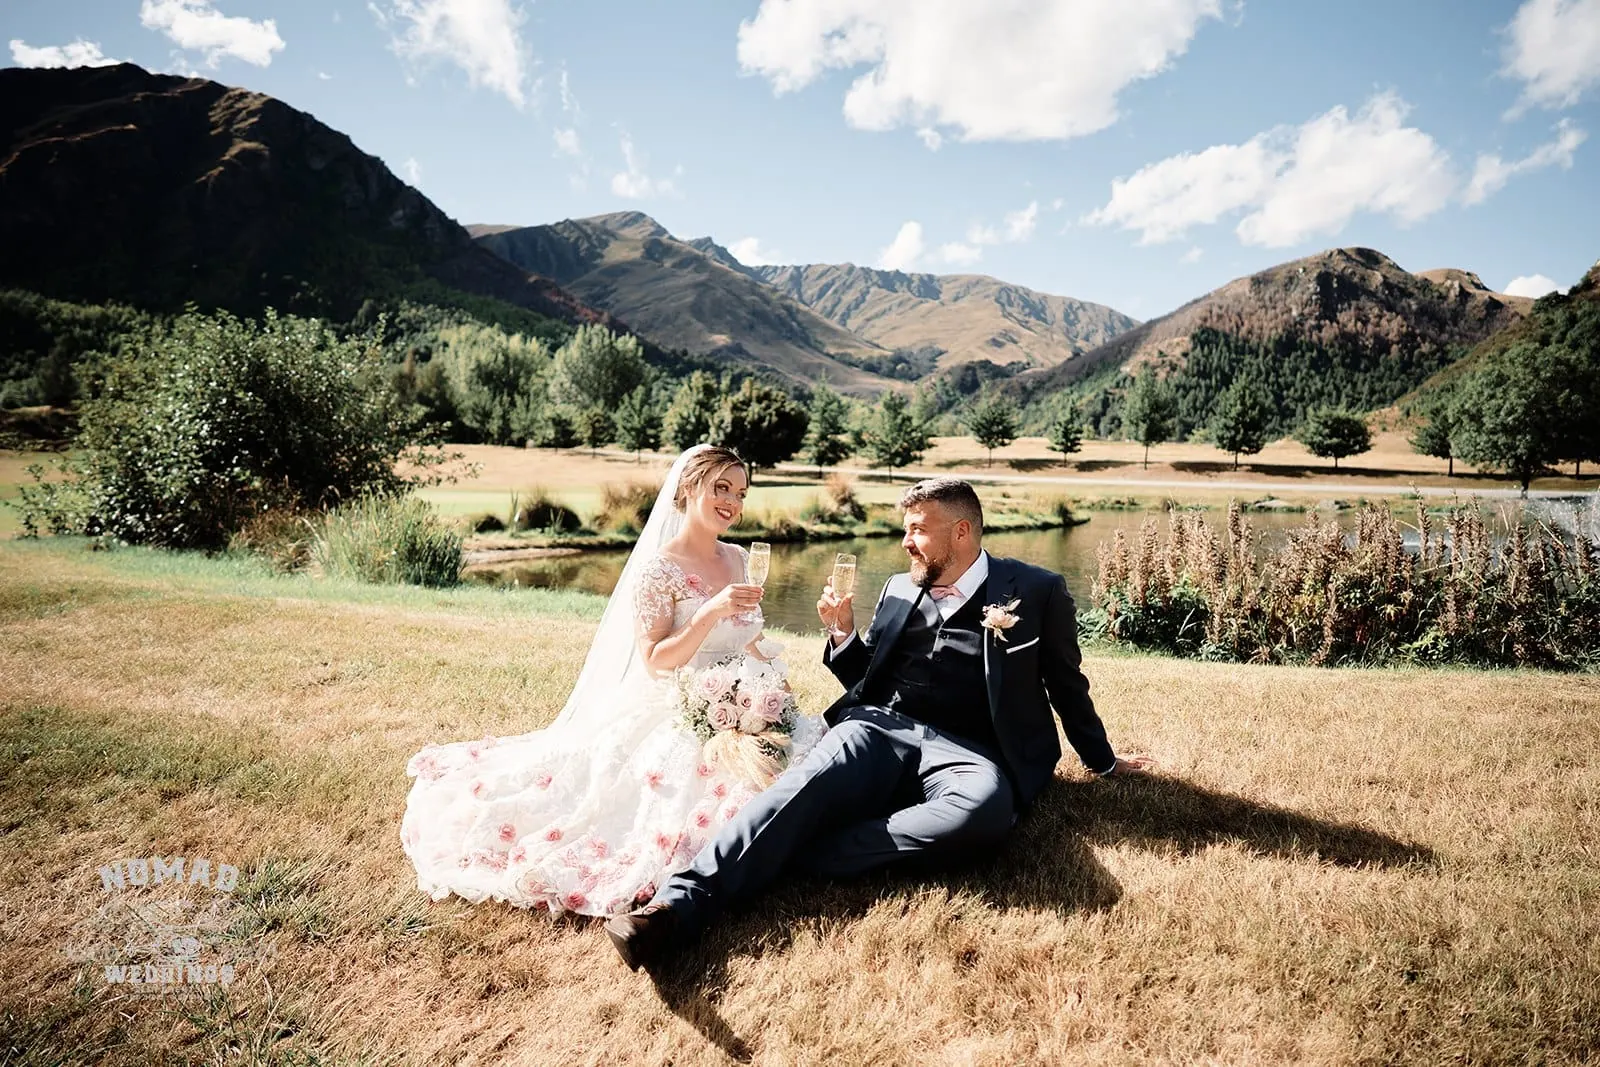 Queenstown New Zealand Elopement Wedding Photographer - A bride and groom sitting on the grass in front of mountains in Queenstown's summer.